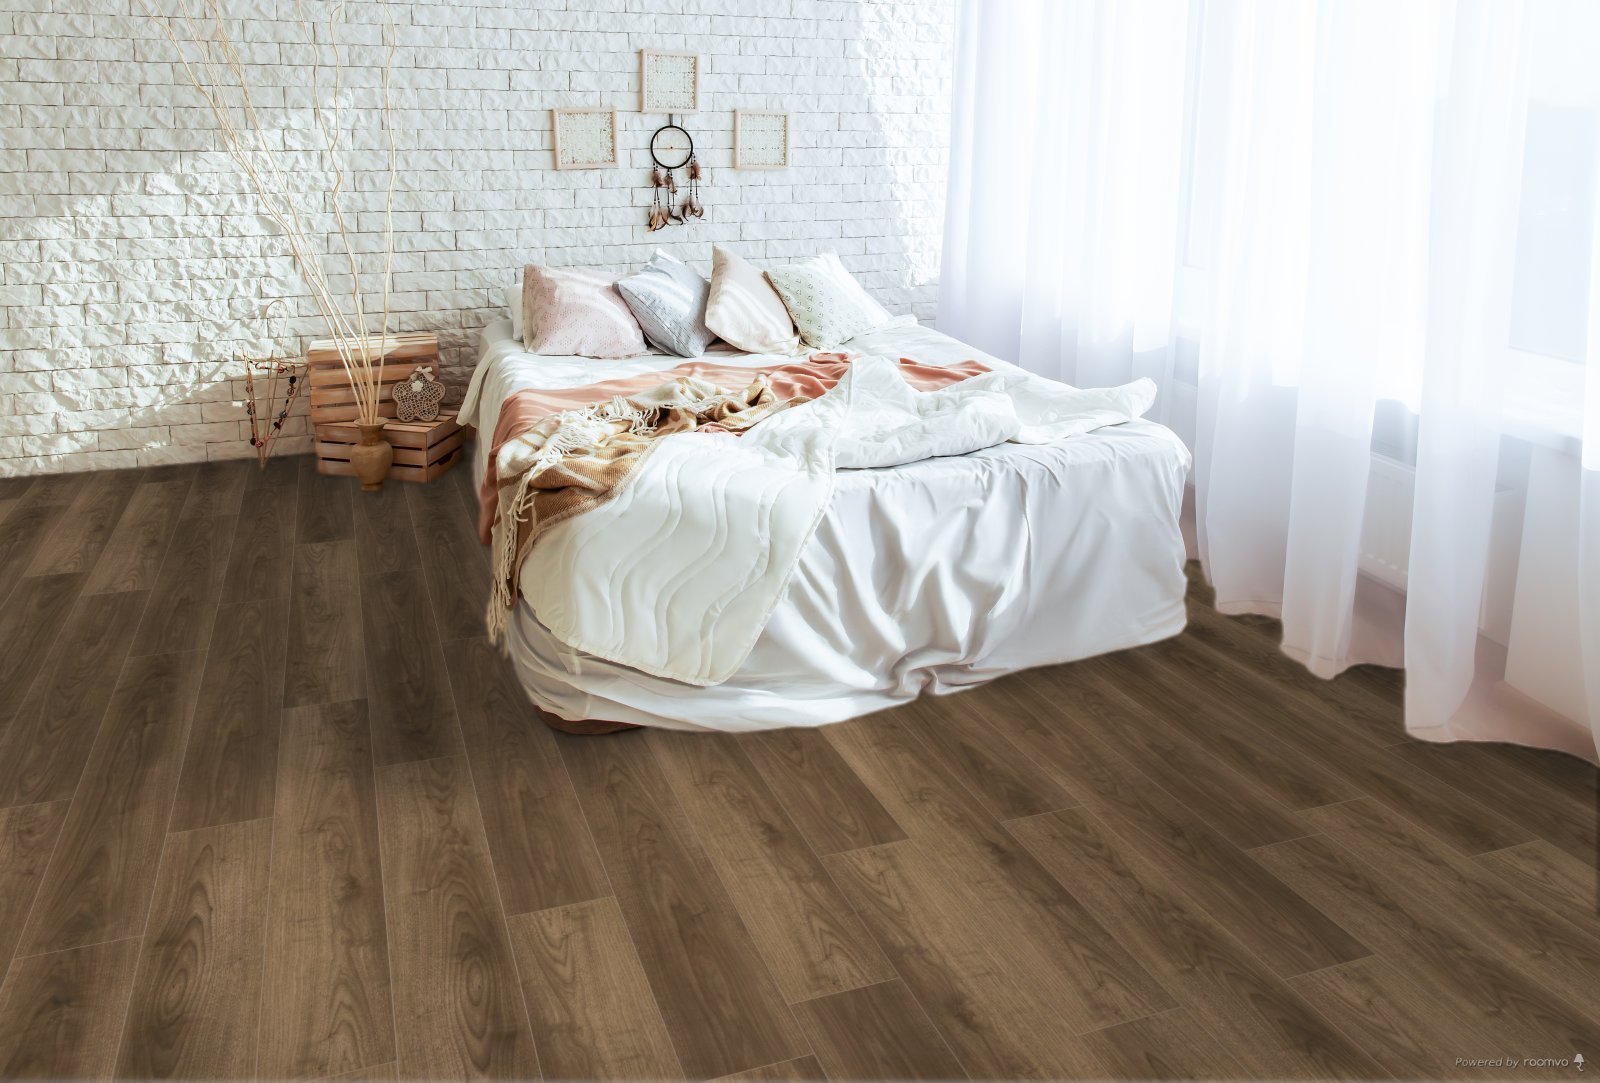 Horizen Flooring presents to you a picture of a quality wide plank Tallis luxury vinyl plank. NovoCore Q XXL Tango collection features a wide range of colors & designs that will compliment any interior. Natural wood grain synchronized surface allow for an authentic hardwood look & feel. This collection features a 0.3″ / 7.5 mm overall thickness and a durable 22 mil / 0.55 mm wear layer for residential and commercial applications.